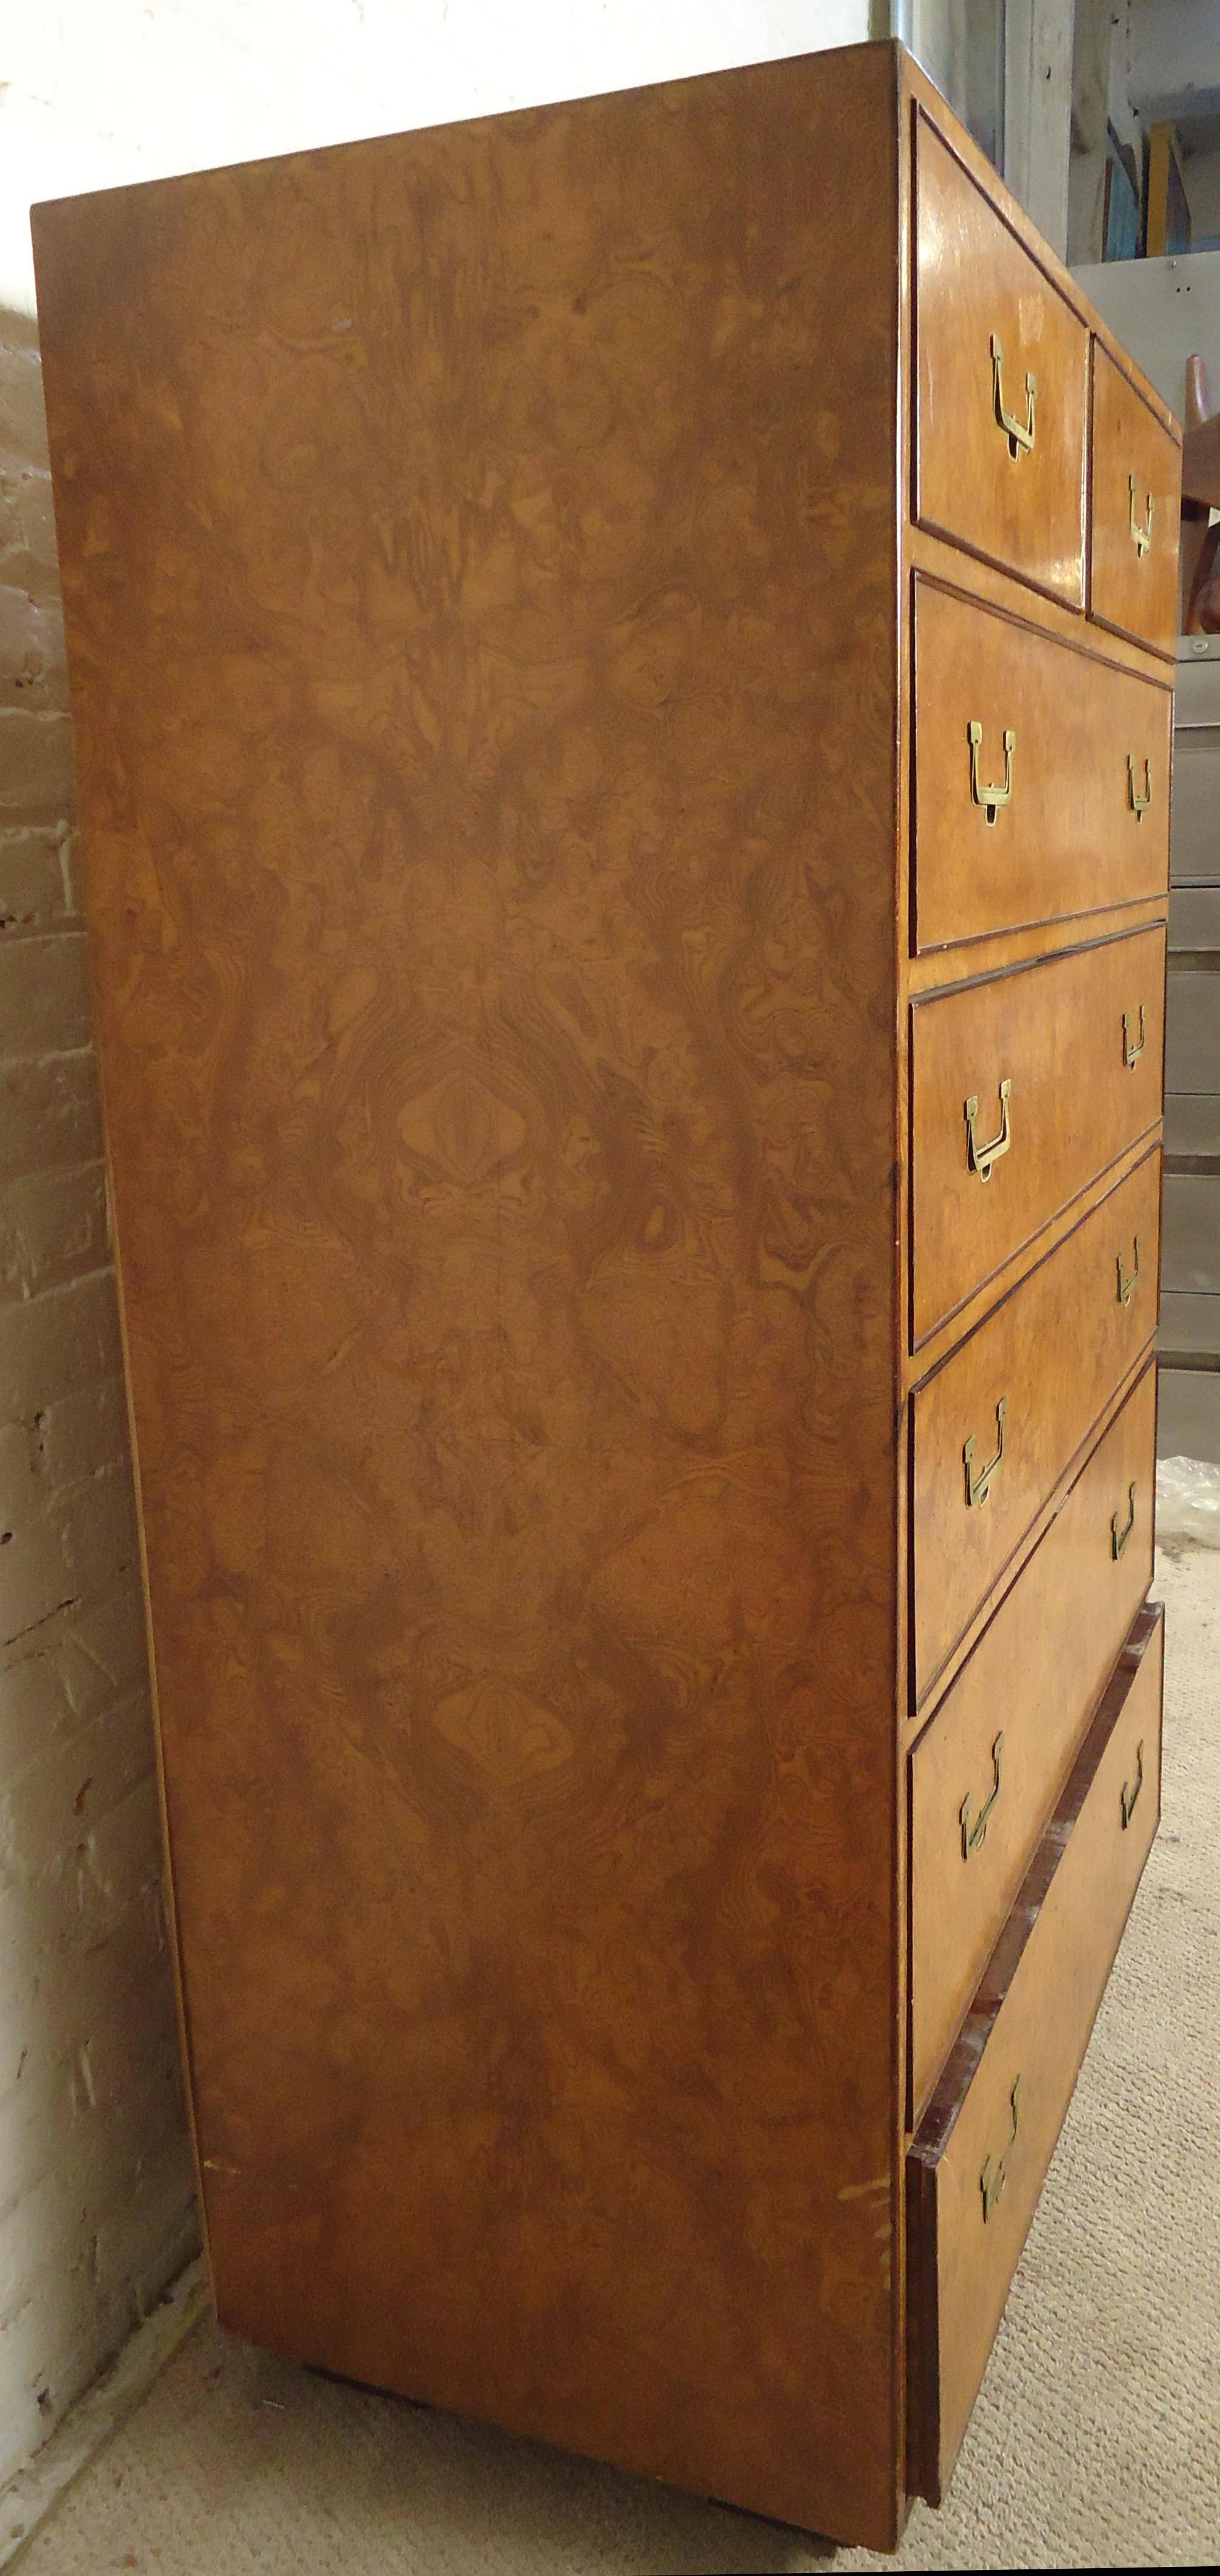 Vintage-modern tall dresser featuring seven drawers with sculpted brass handles, beautiful burl wood grain throughout, manufactured by Widdicomb.

Please confirm item location NY or NJ with dealer.